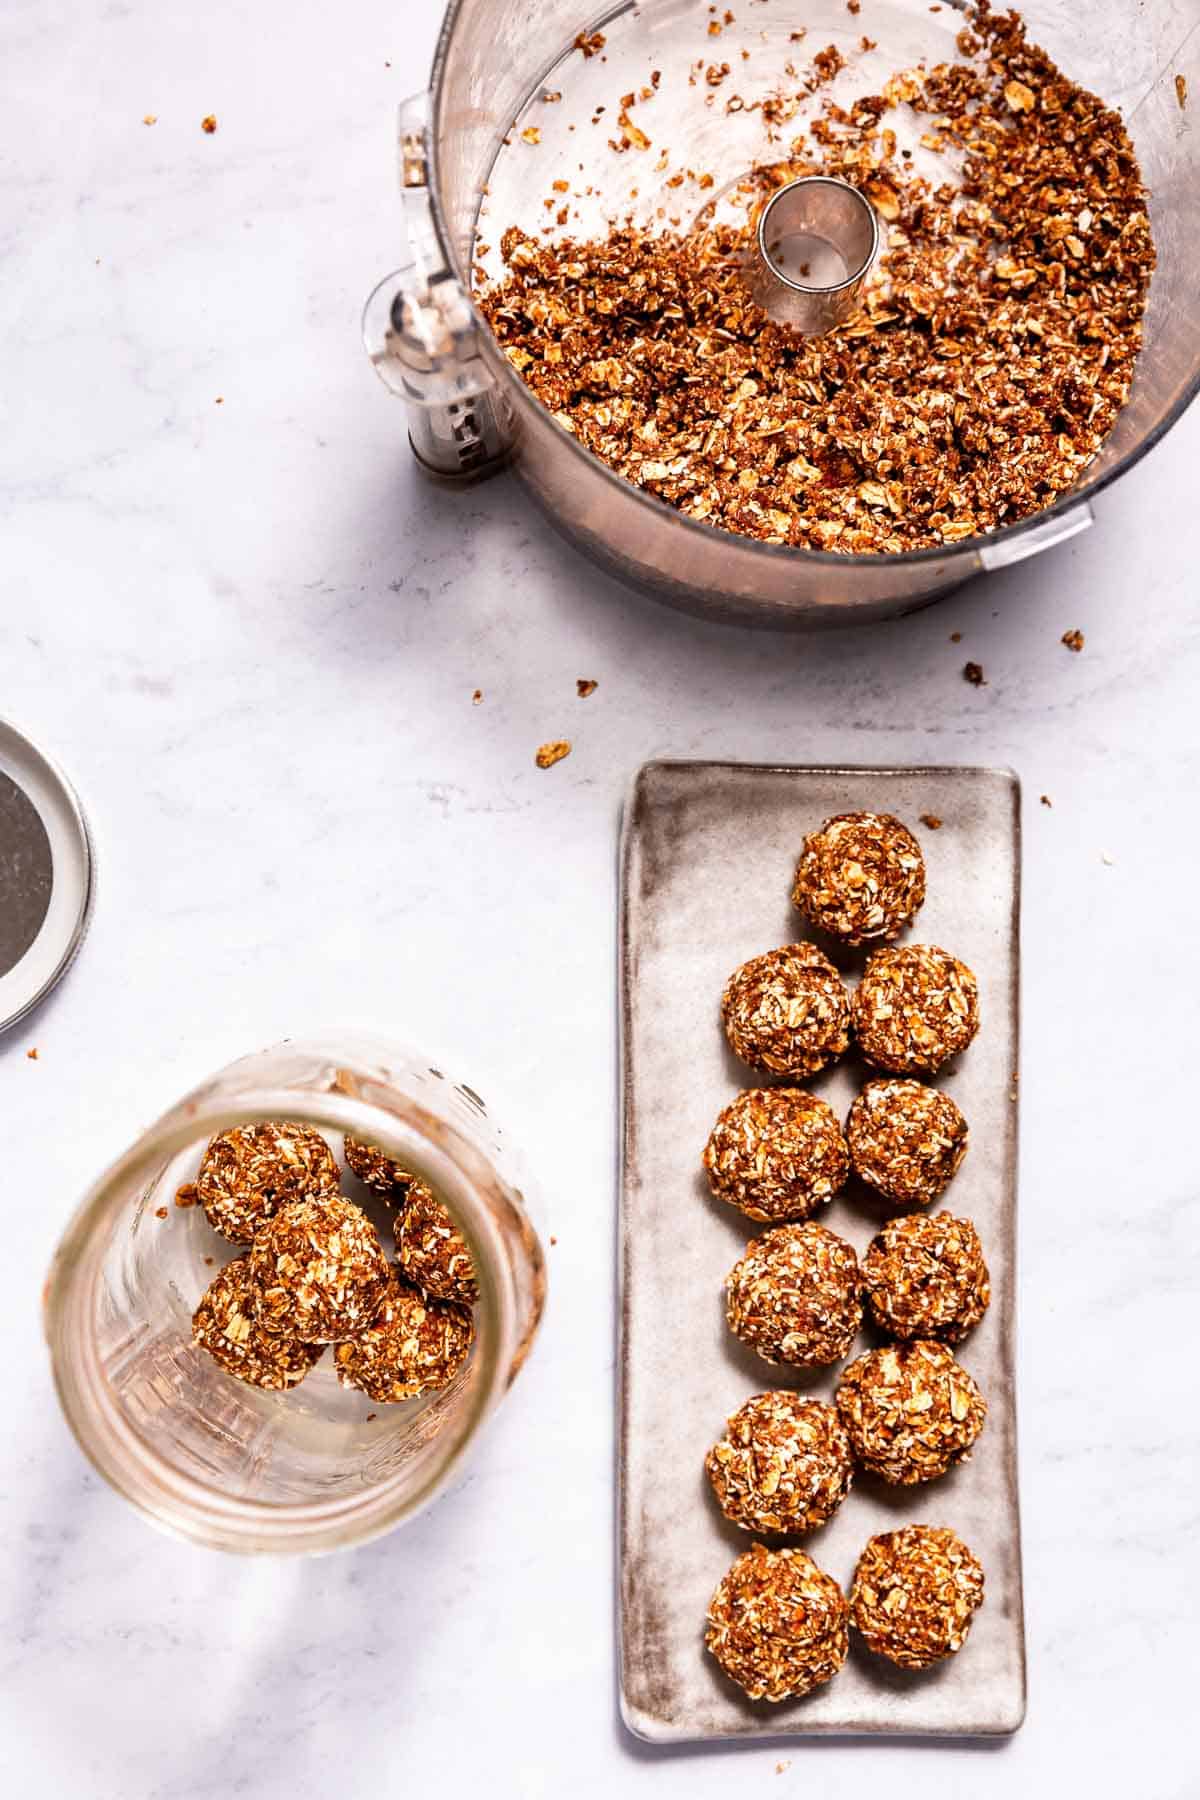 Chocolate orange energy balls on a long serving plate, with processed ingredients in a food processor and finished balls in a jar.